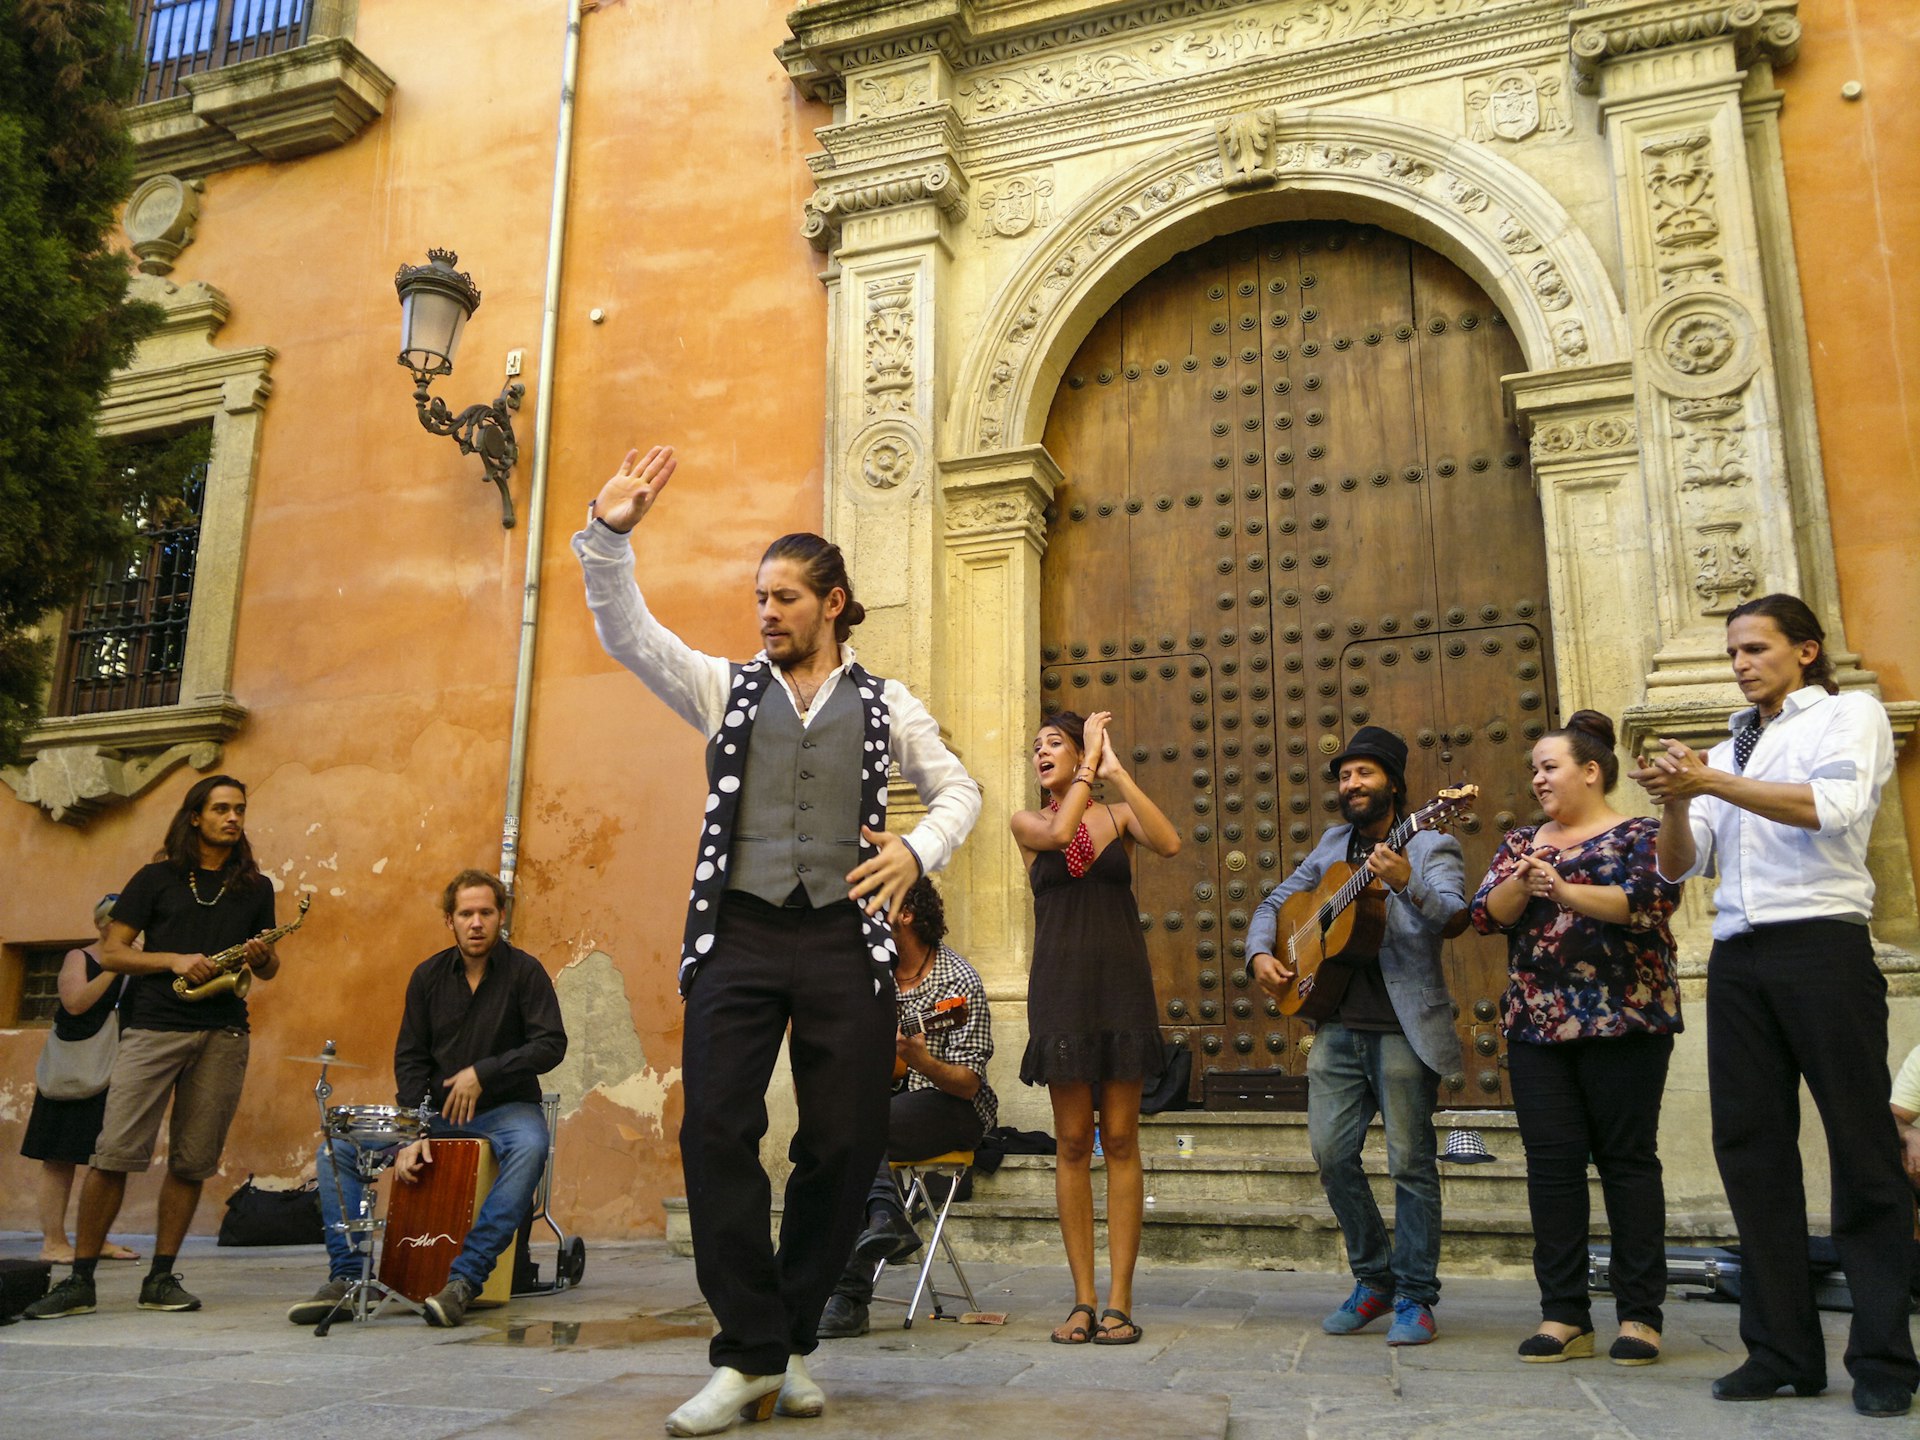 Flamenco dancer and muisicians performing by the Archiepiscopal Palace at Alonso Cano square in the historical centre of Granada